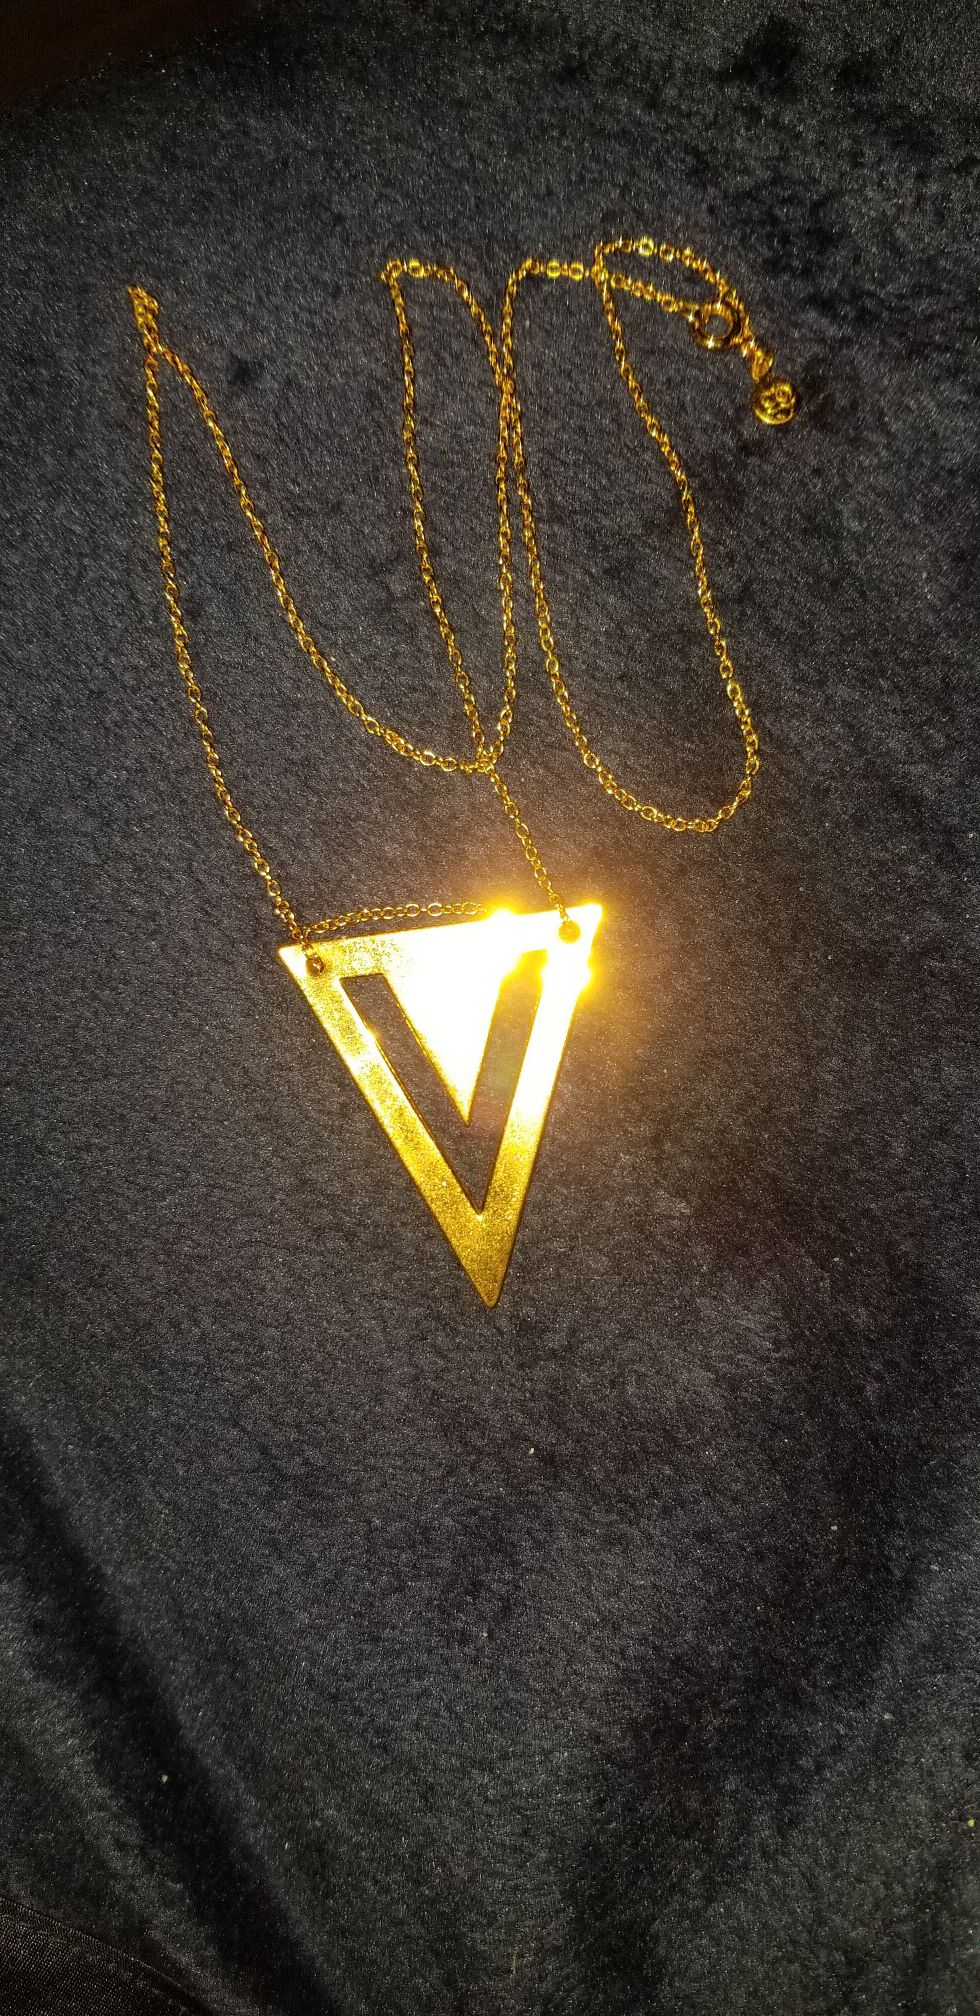 Double V Cut Out Gold Filled Necklace